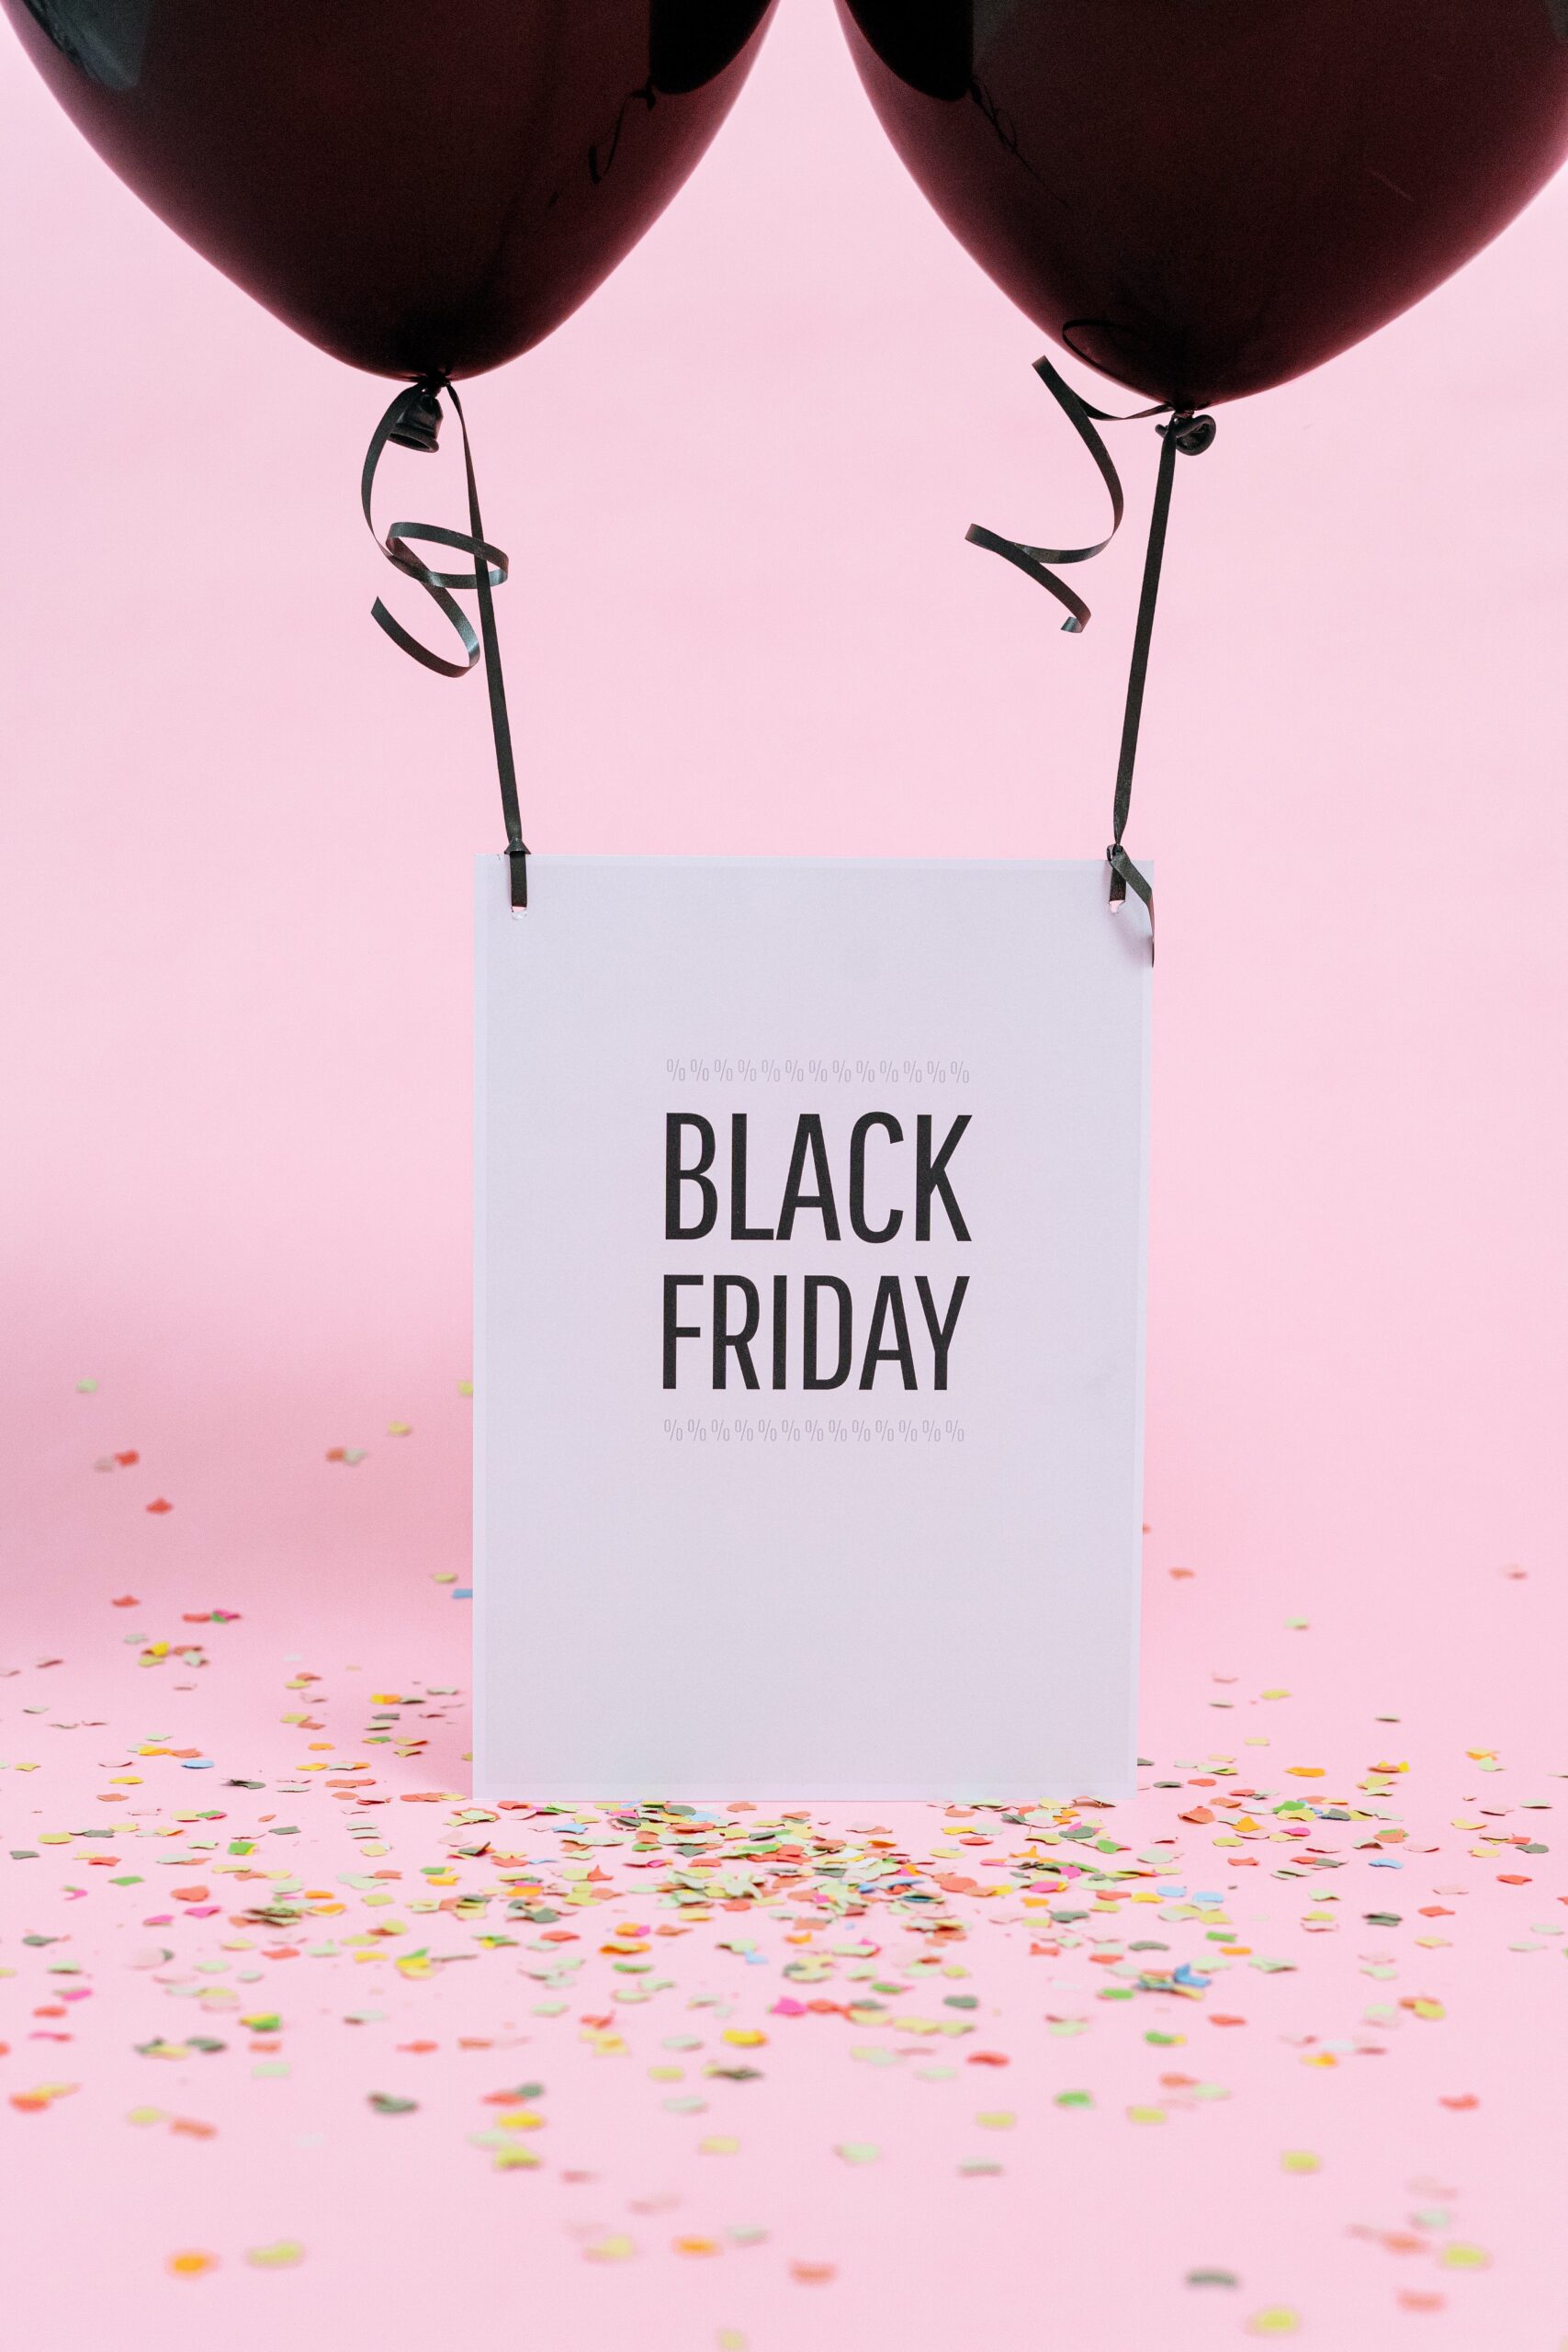 10 Incredible Stores that you will fall in love with this Black Friday!